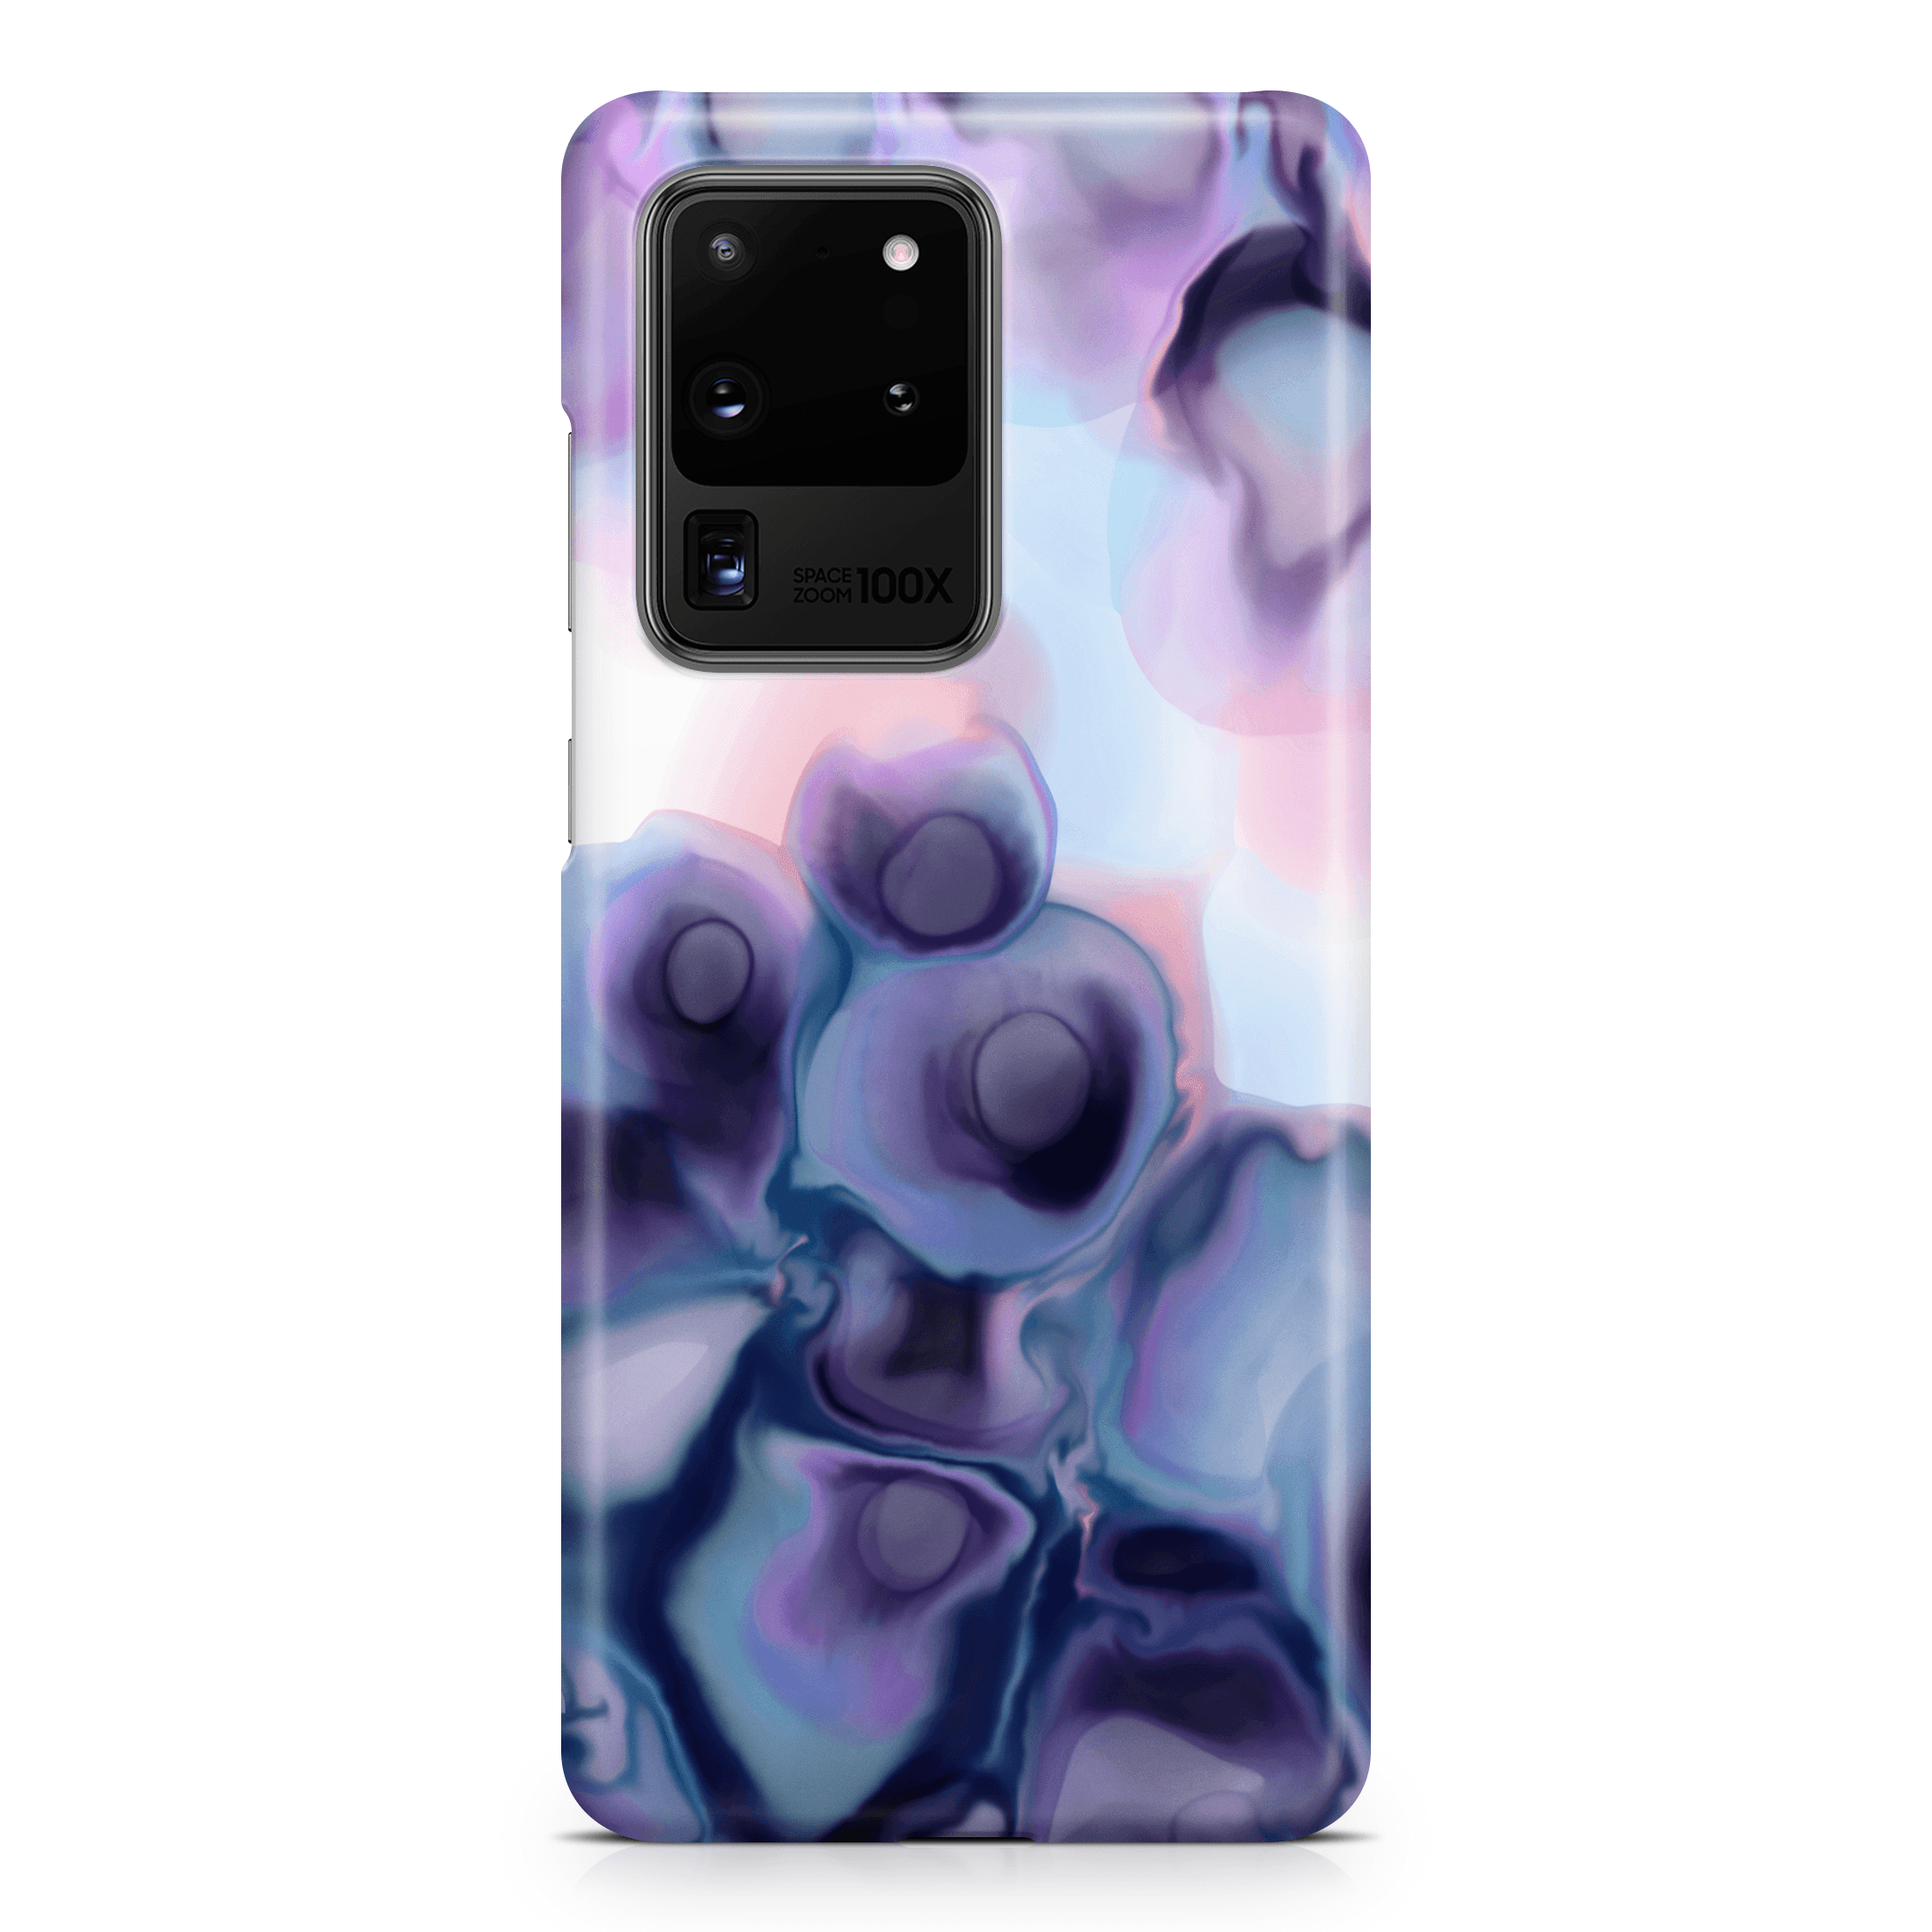 Tropical Fluid II - Samsung phone case designs by CaseSwagger